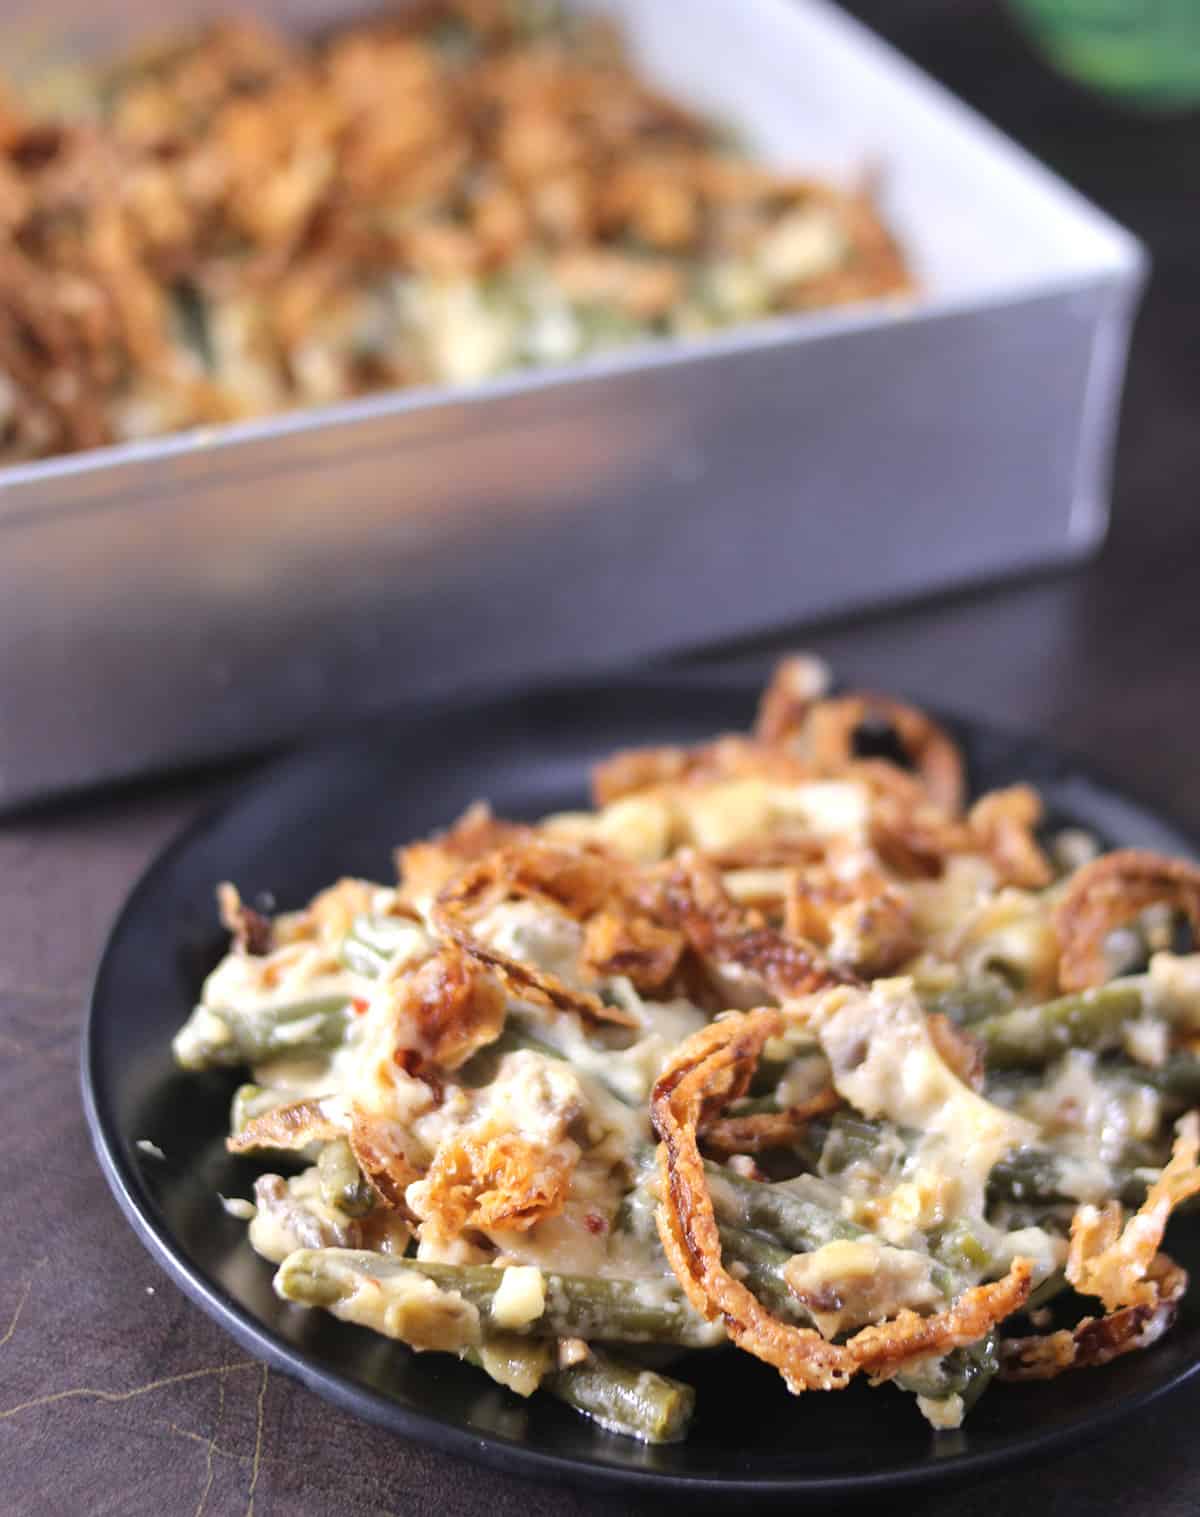 Serving green bea casserole on black plate garnished with crispy fried onions, best side dish for holiday 